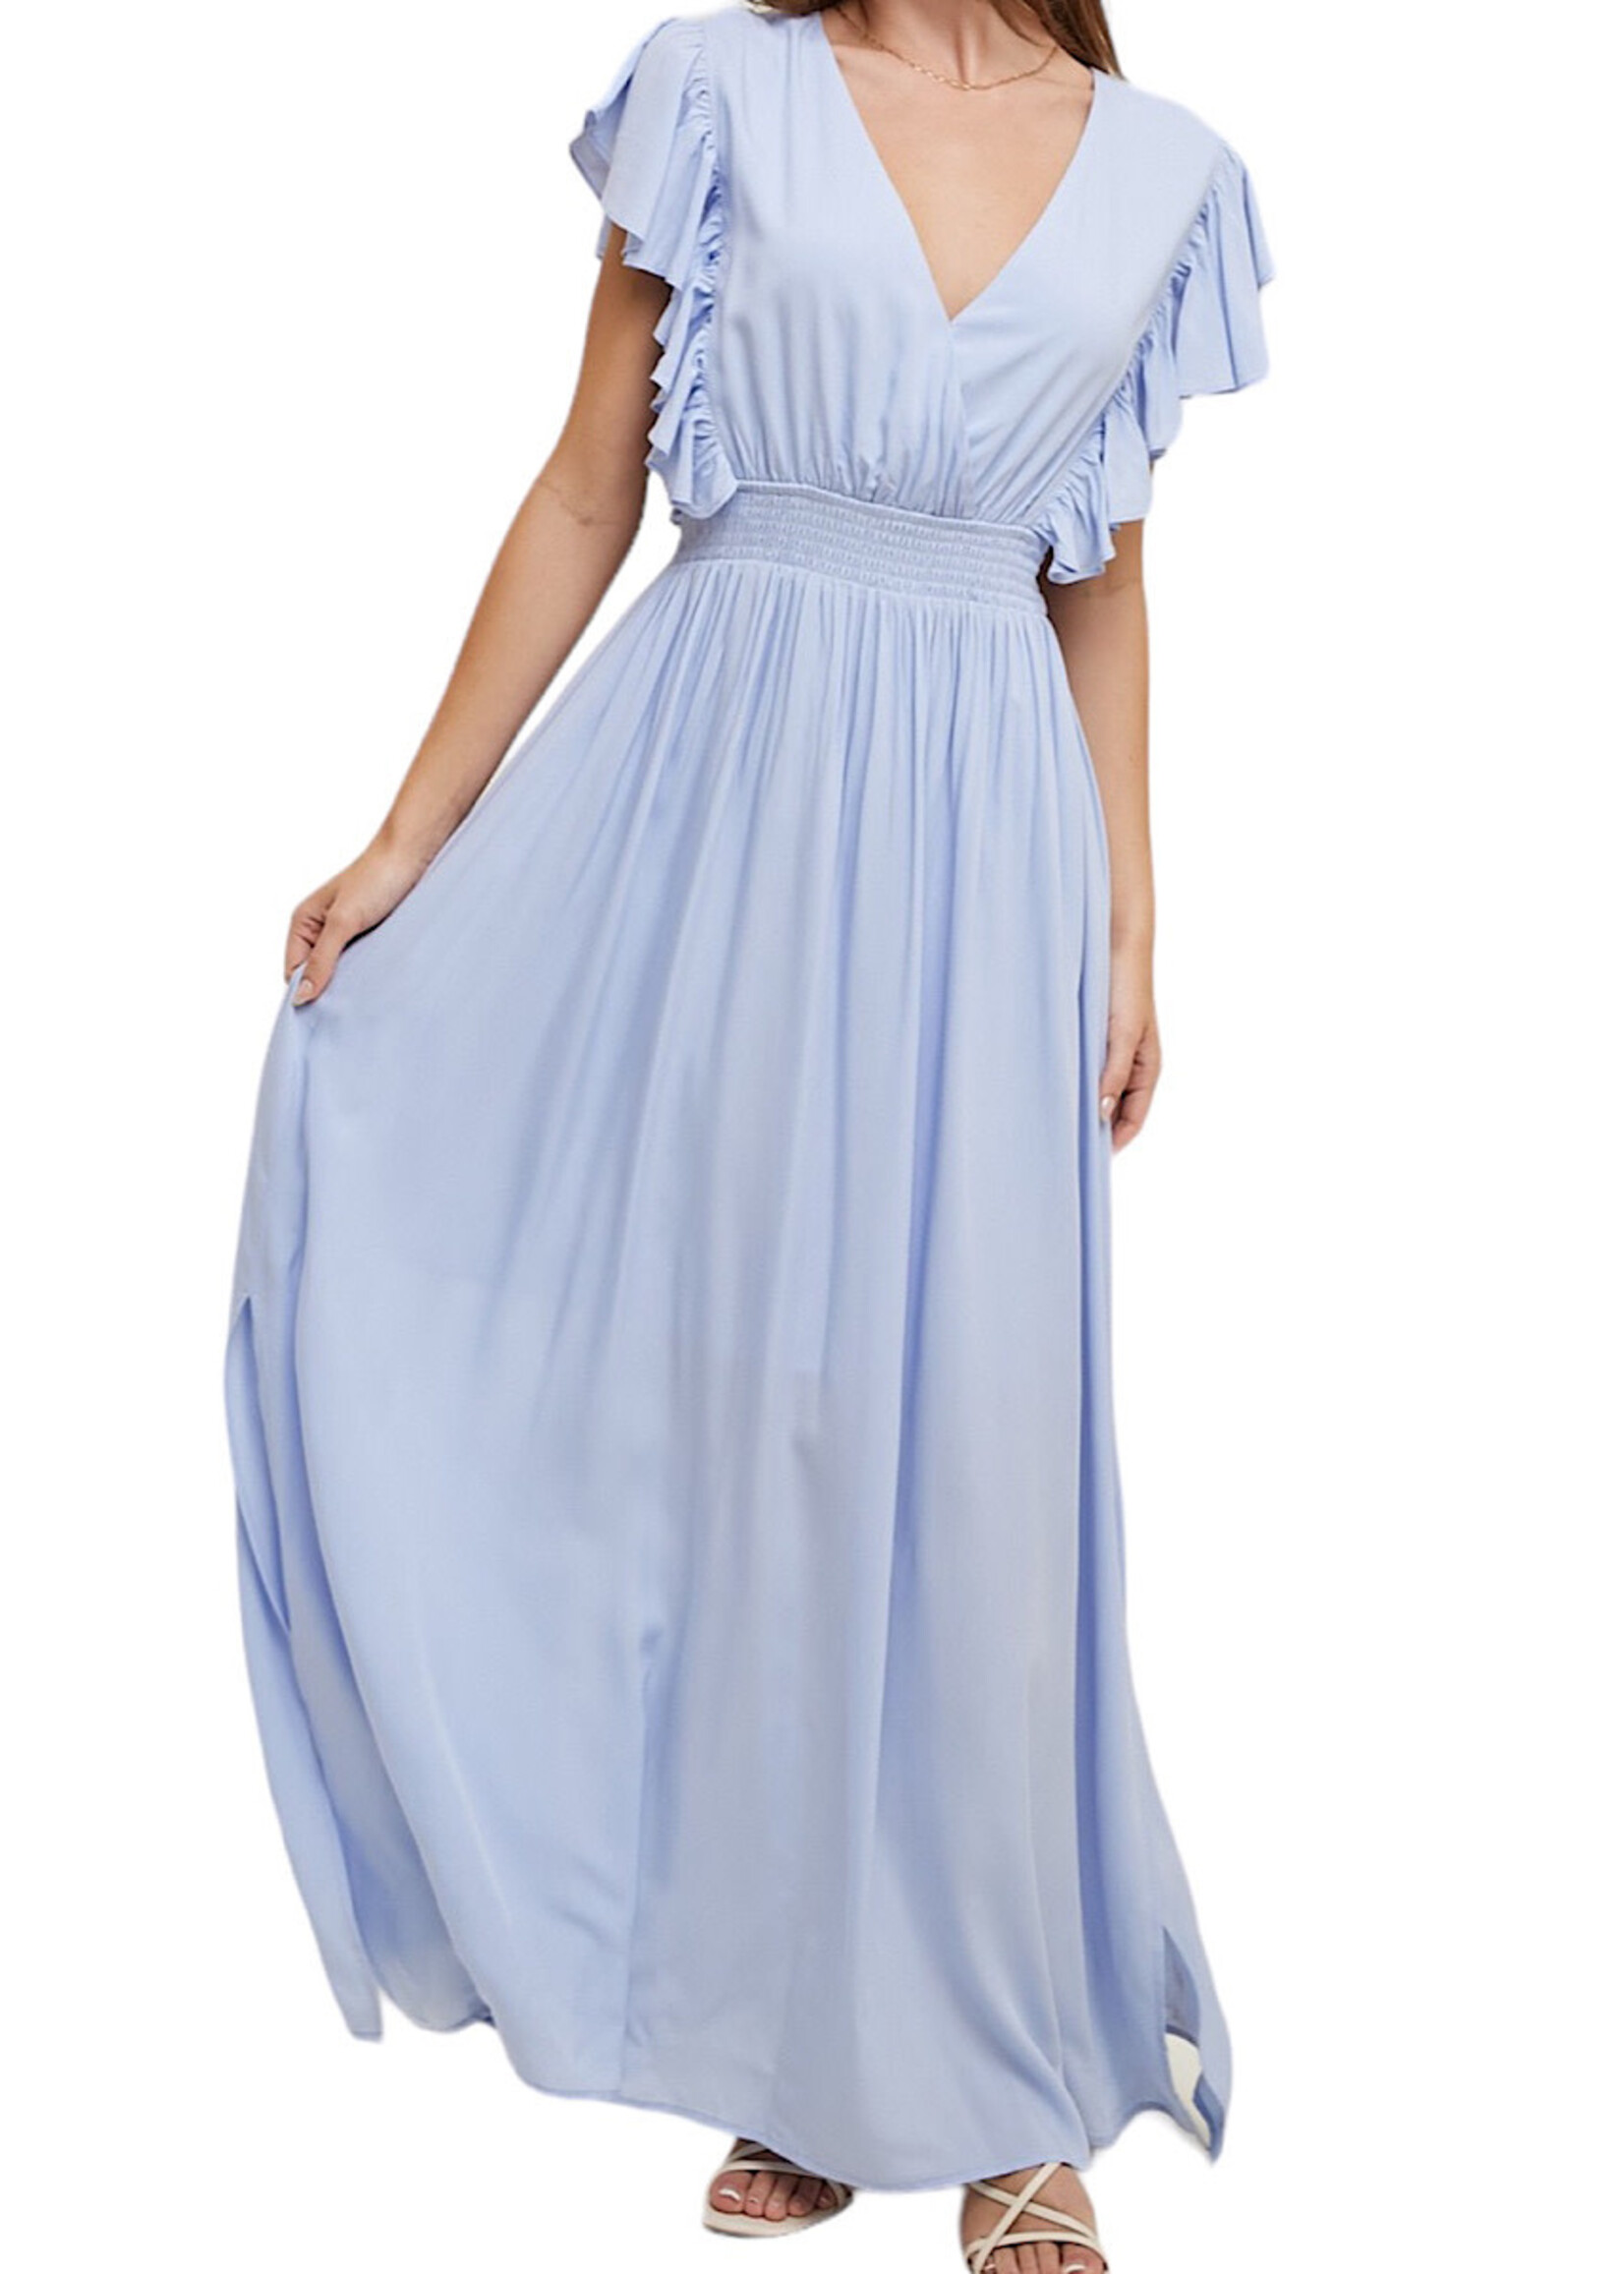 Sky Flutter Sleeve Maxi Dress with Self Back Tie